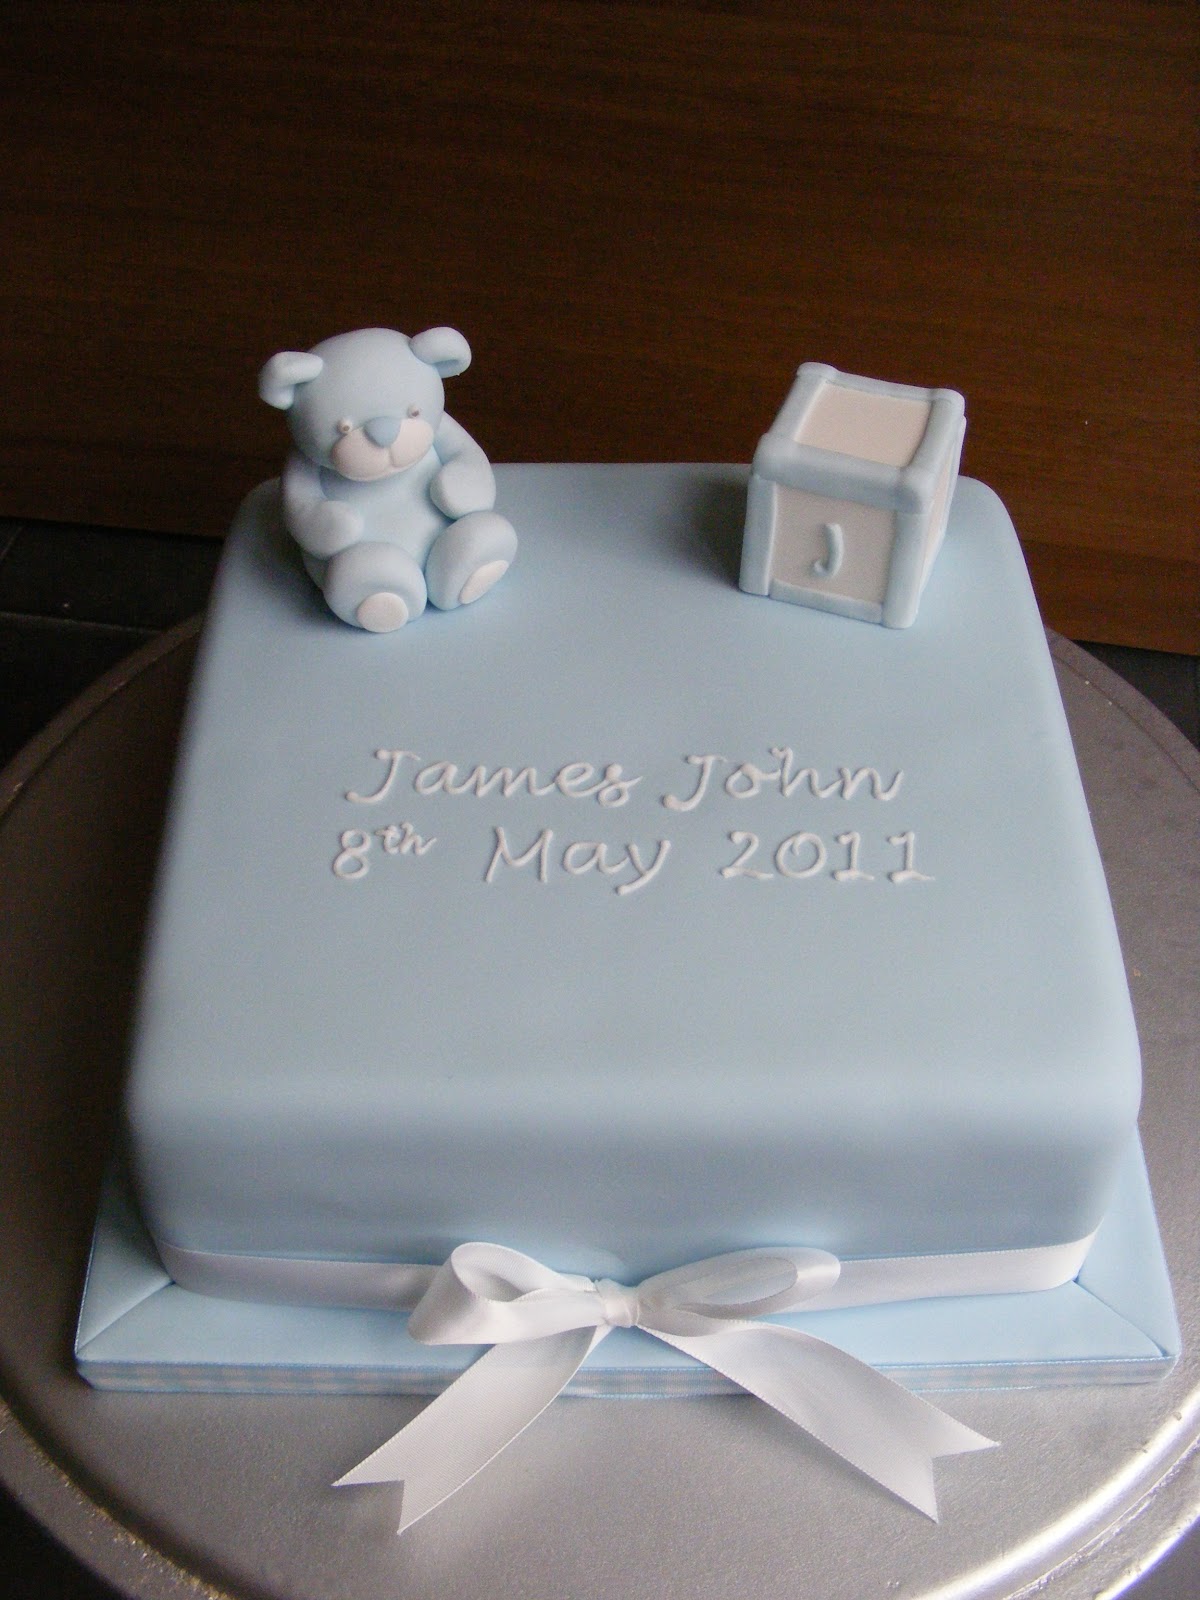 Cakes By Karen: Christening cake for a Boy